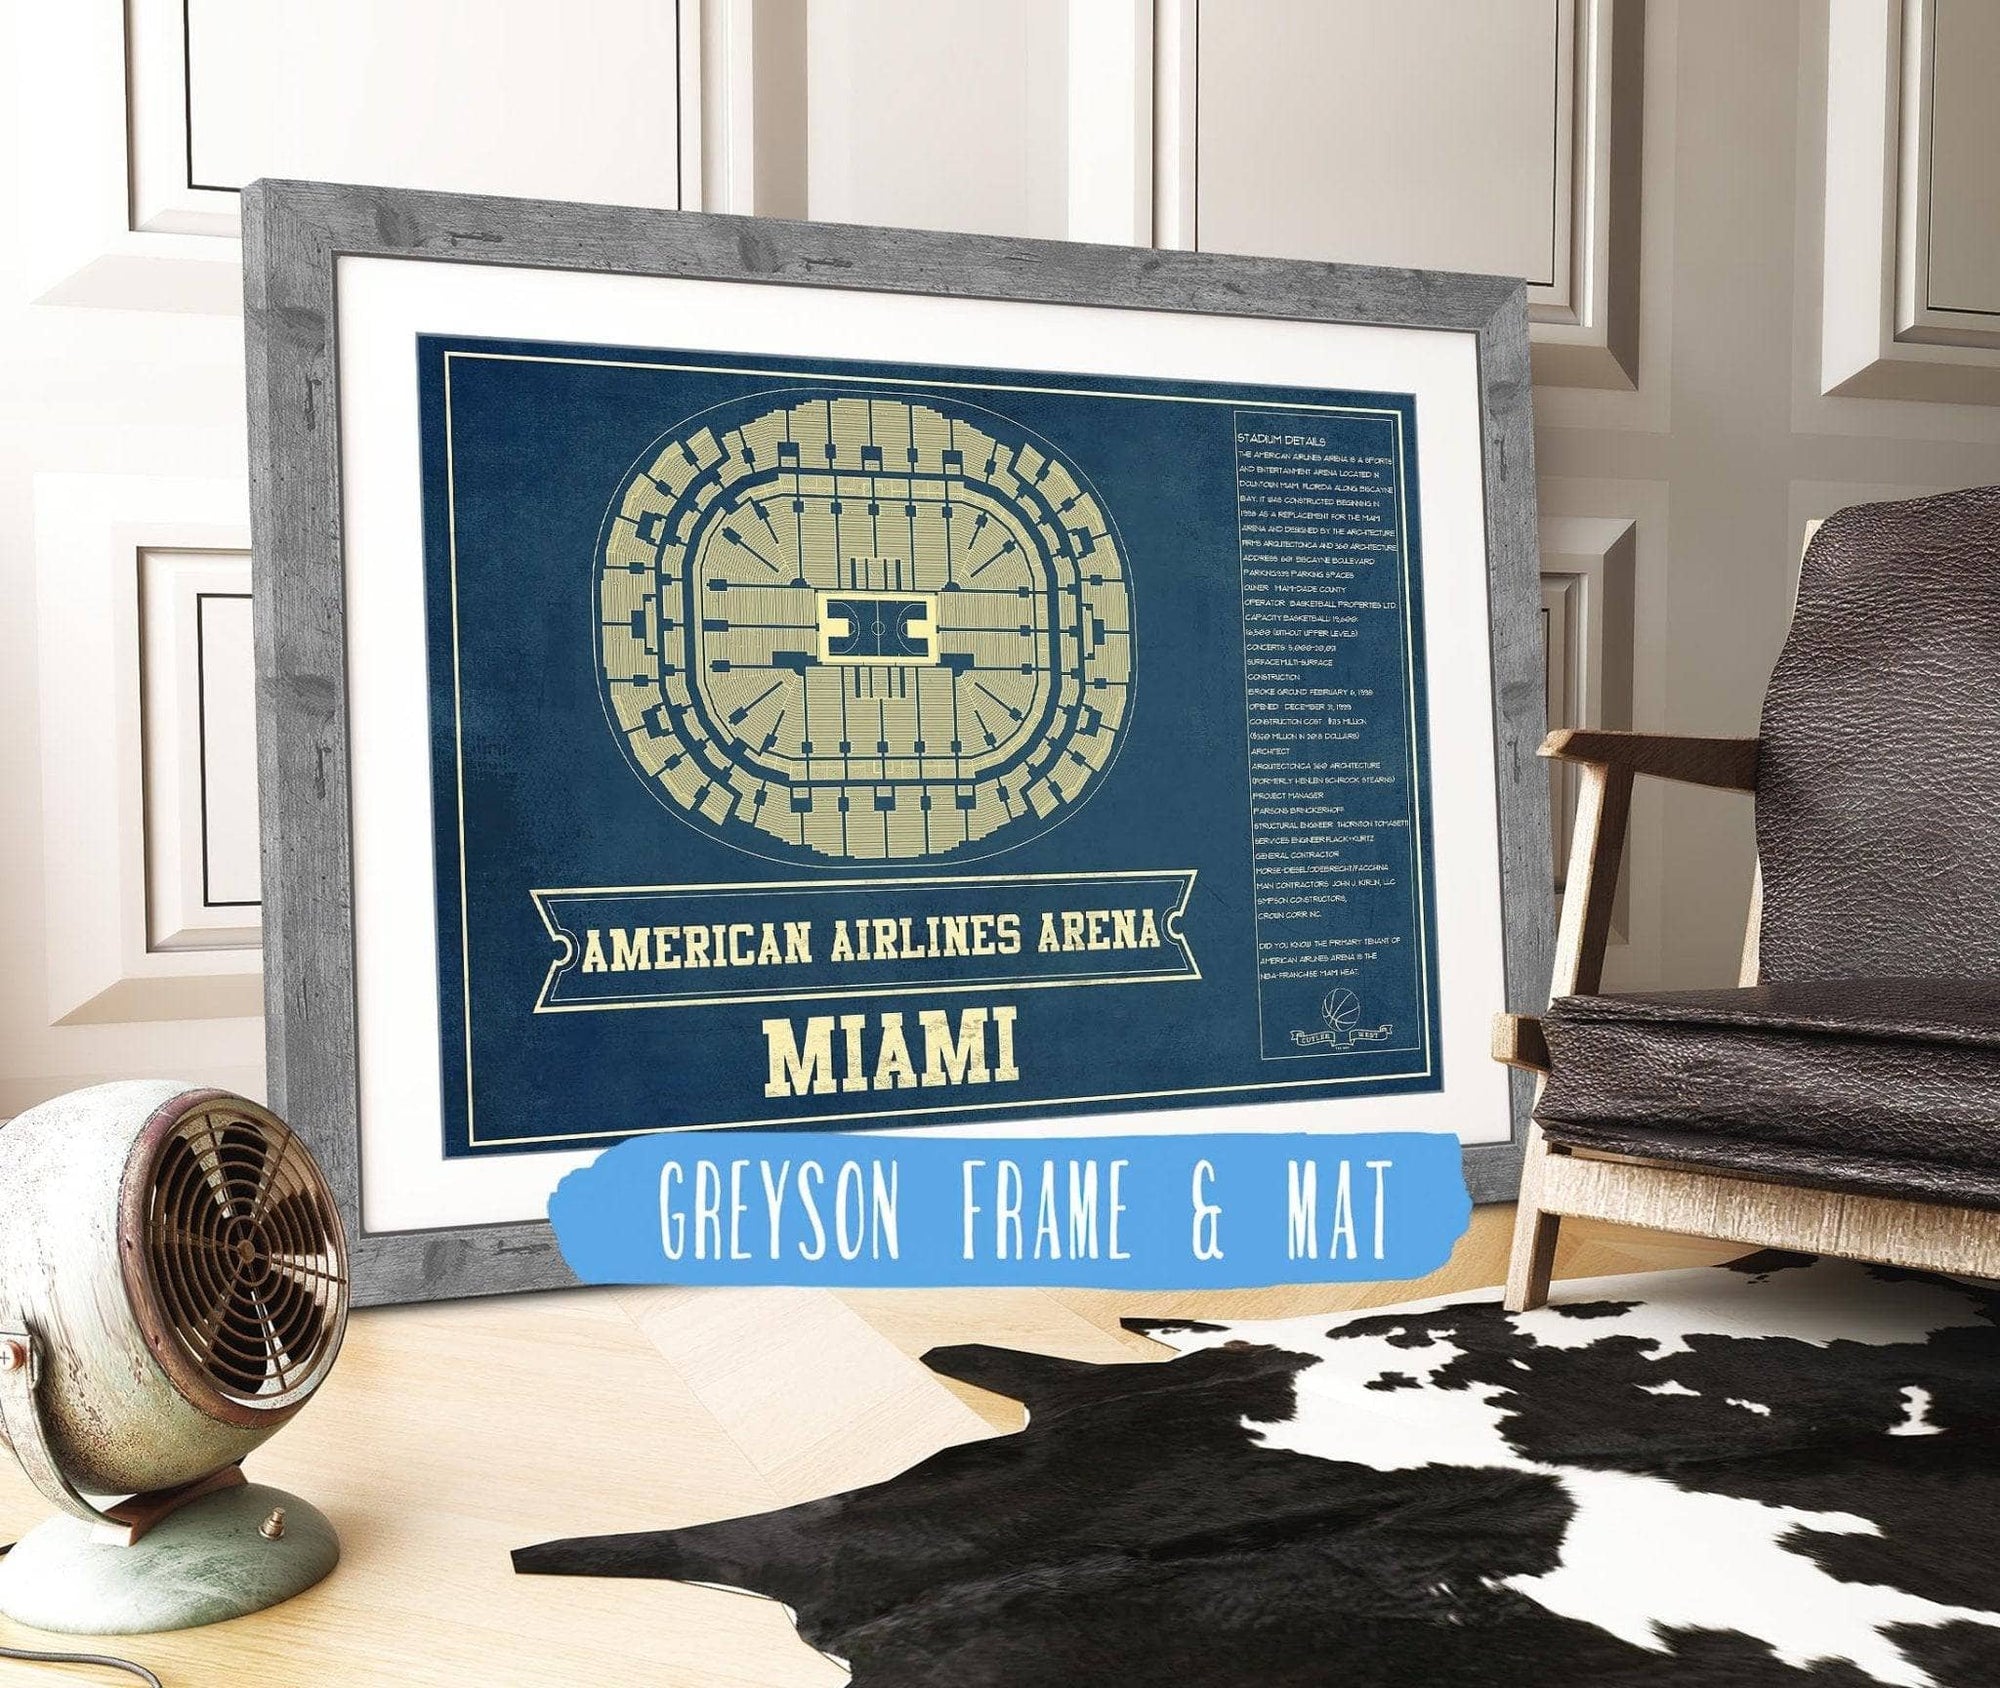 Cutler West Basketball Collection 14" x 11" / Greyson Frame Mat Miami Heat - American Airlines Arena Vintage Basketball Blueprint NBA Print 675082021_76835